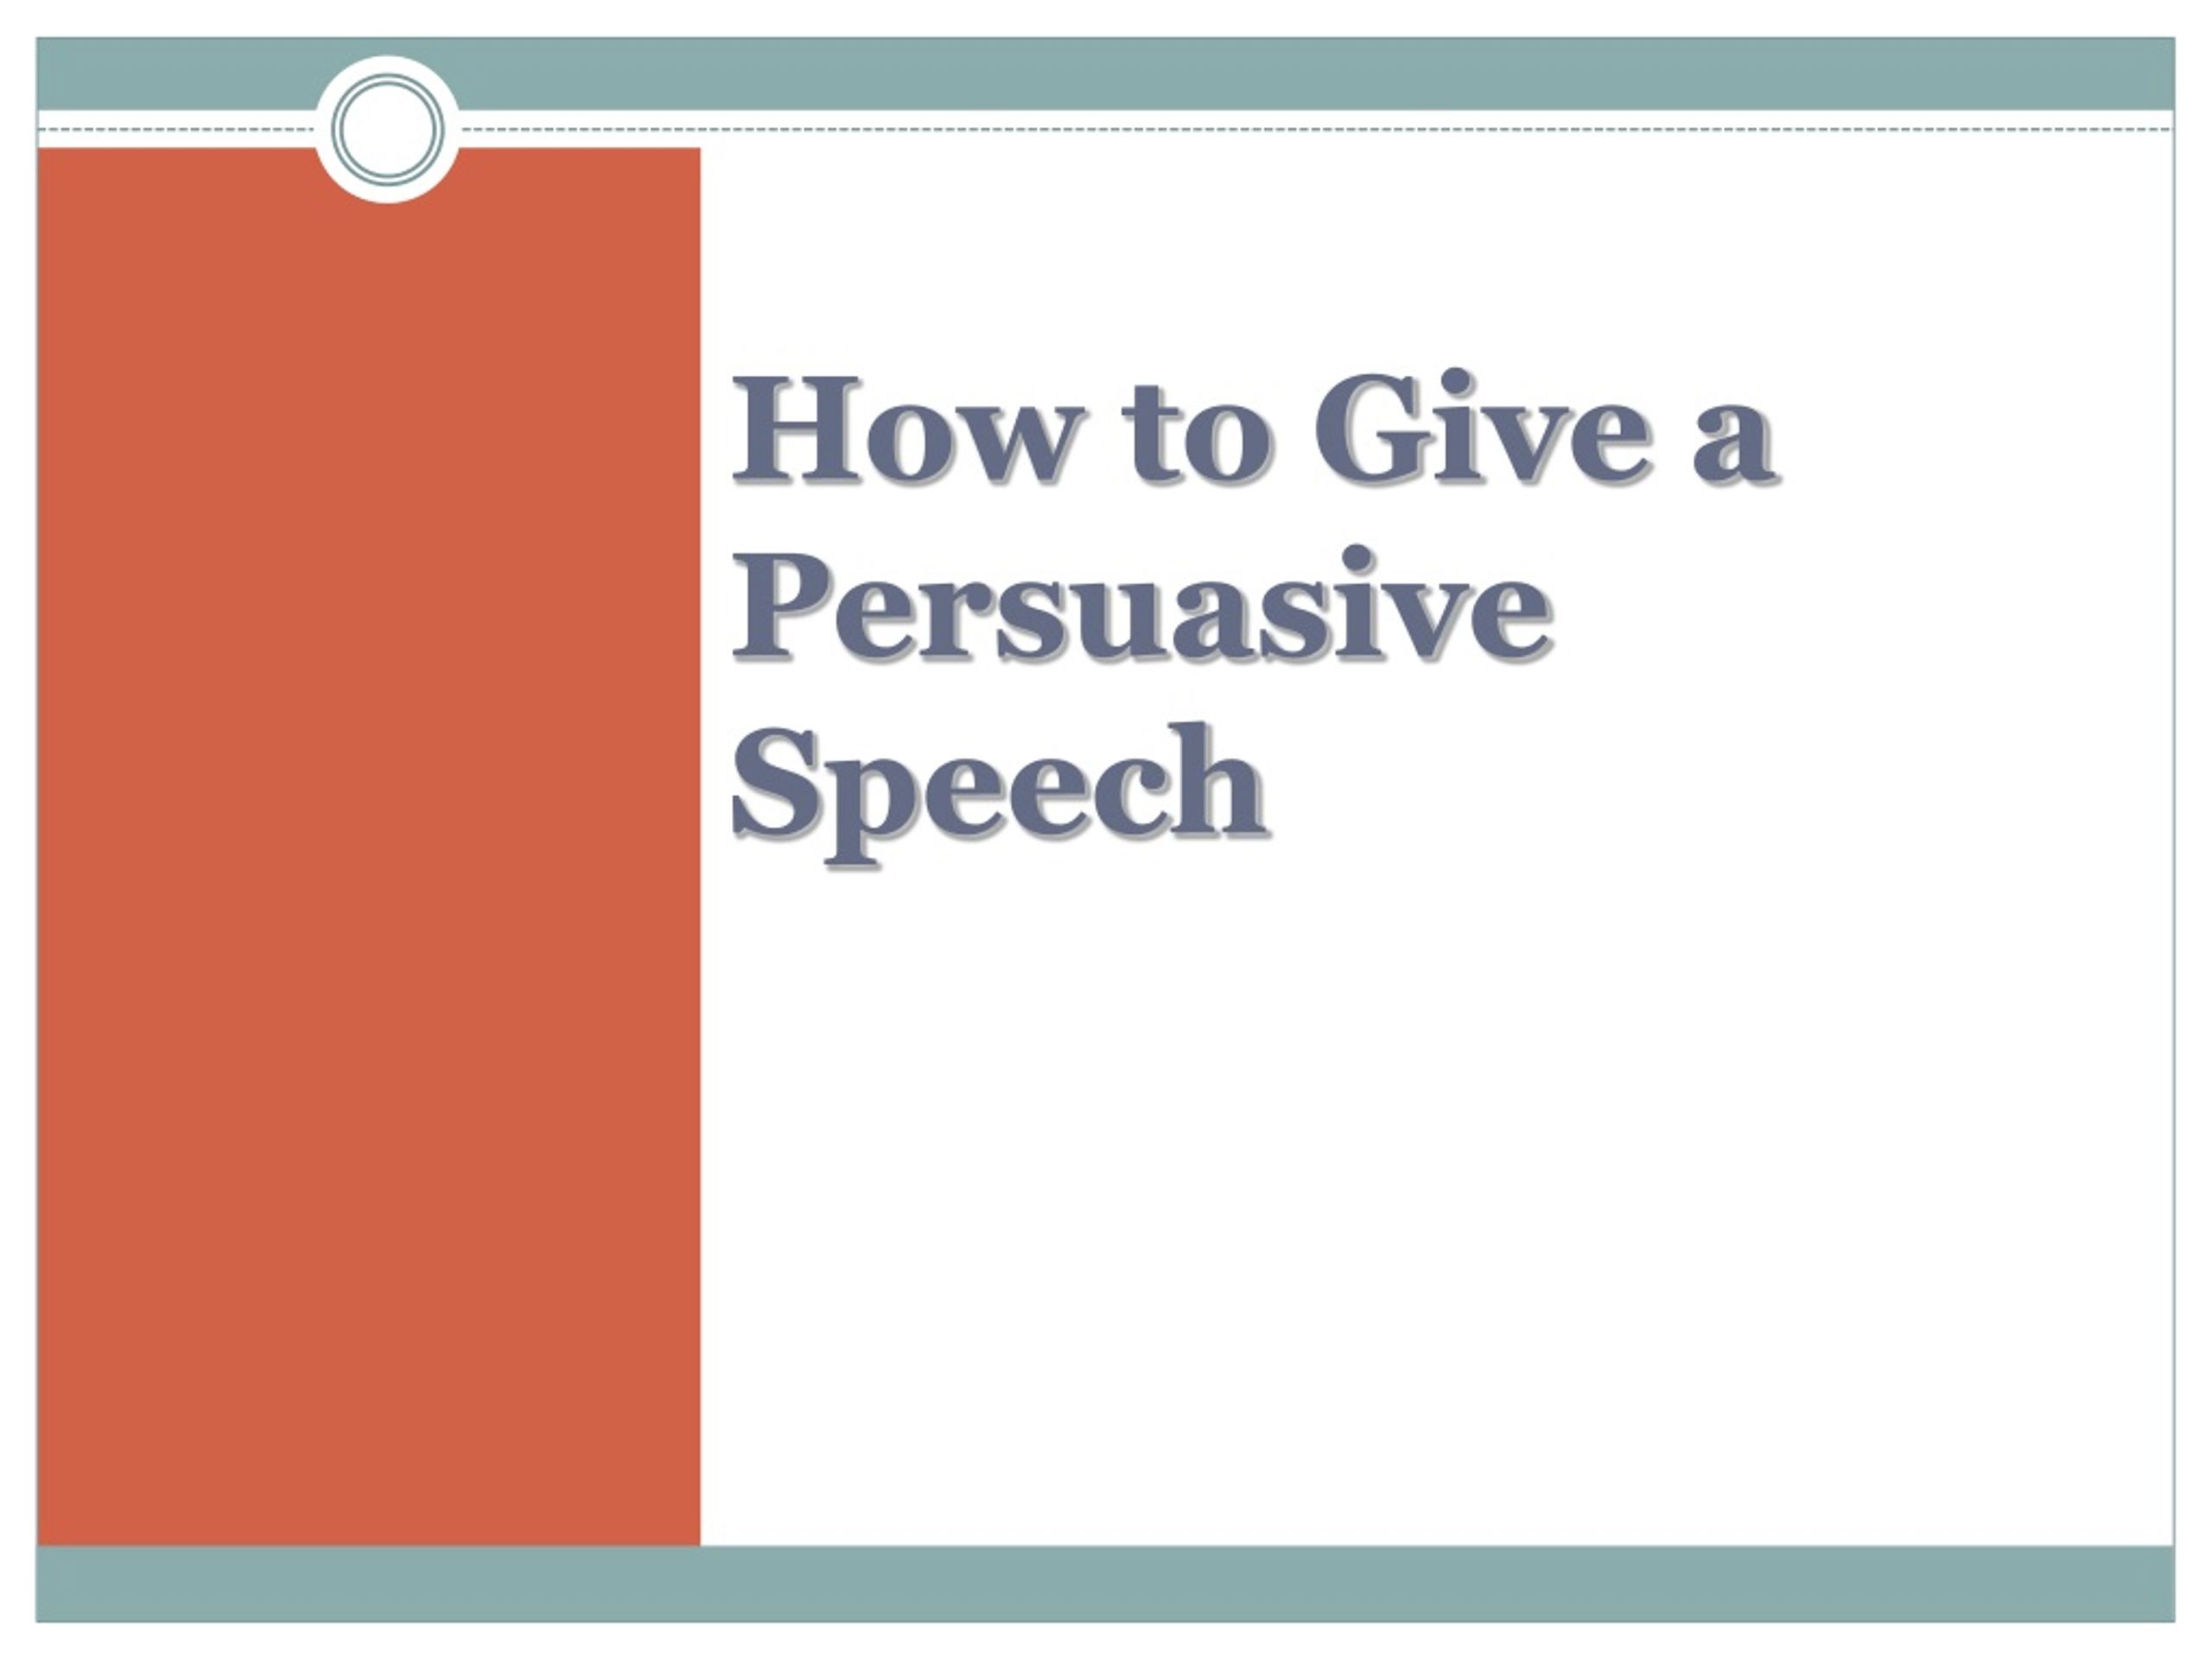 when giving a persuasive speech you should give quizlet